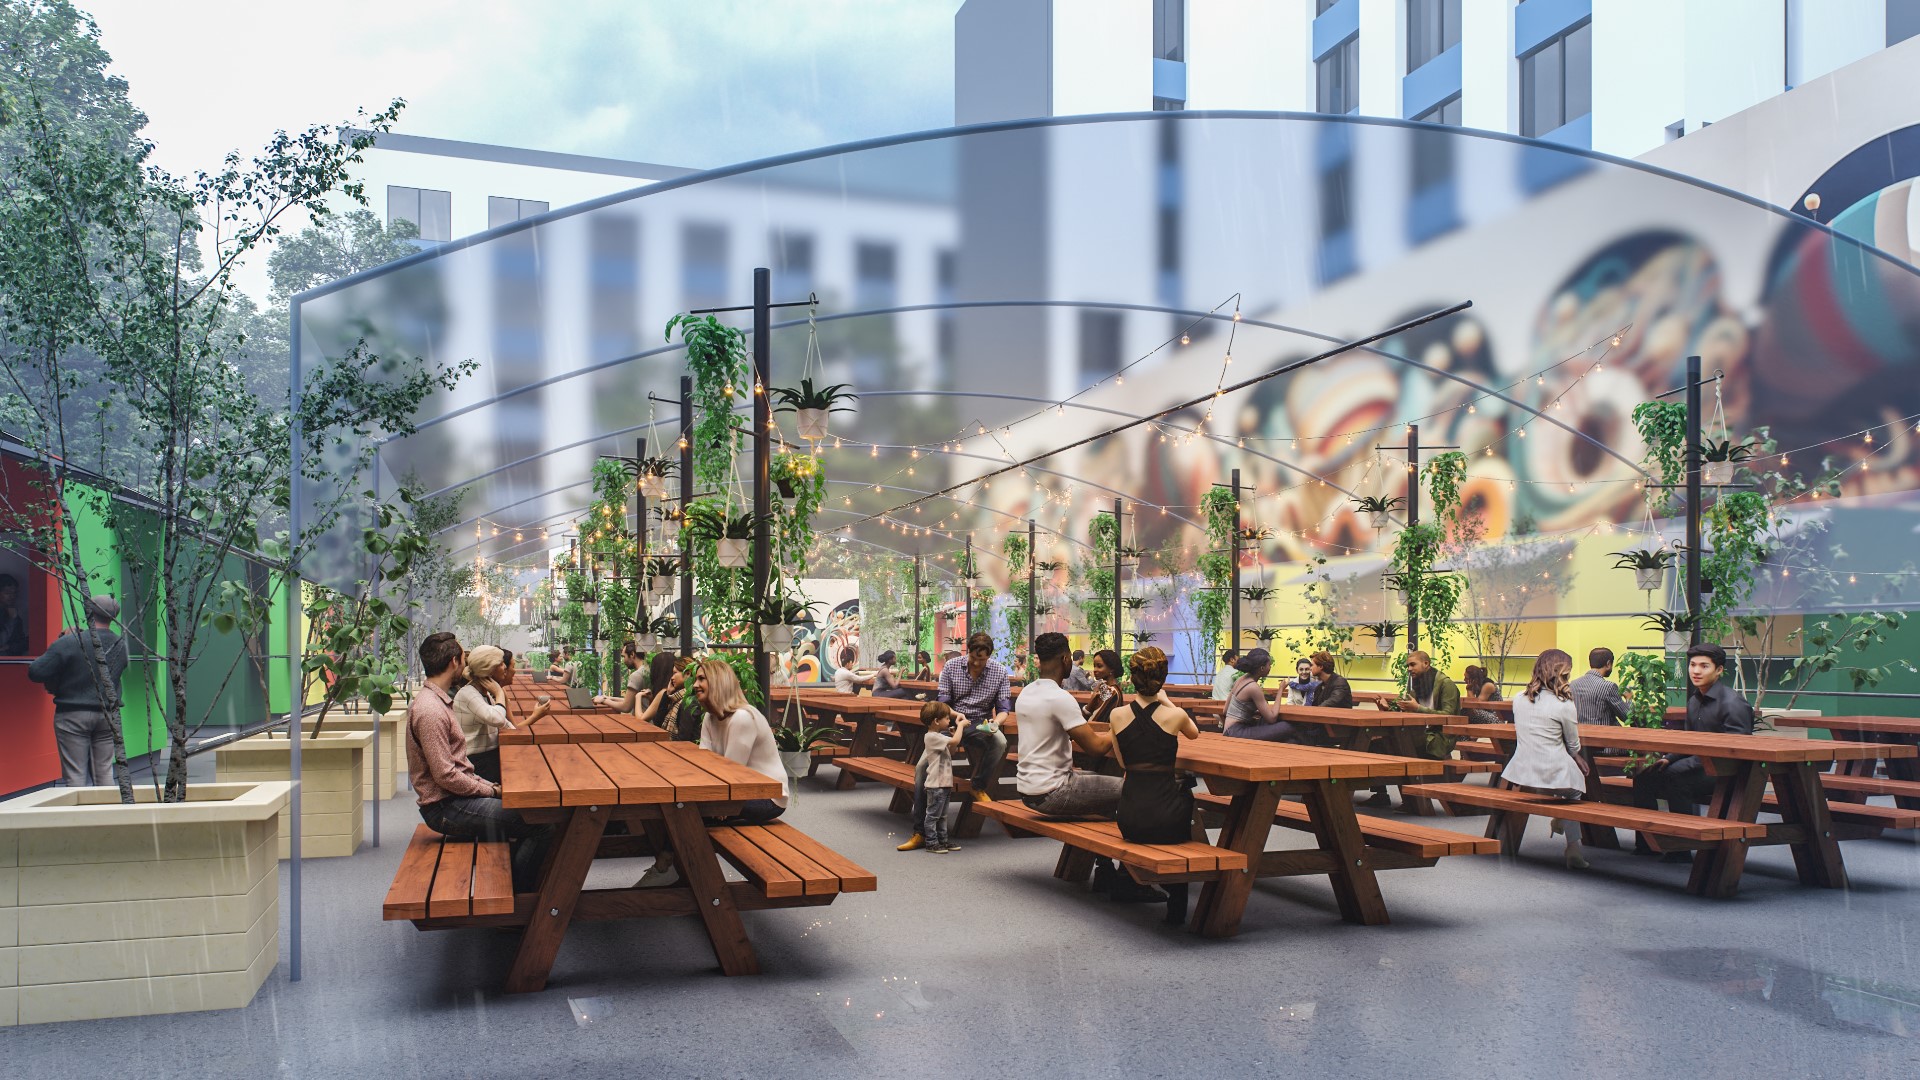 The pod will feature a fun outdoor dining experience with over 300 seats available, and existing food carts expected to return as soon as July.